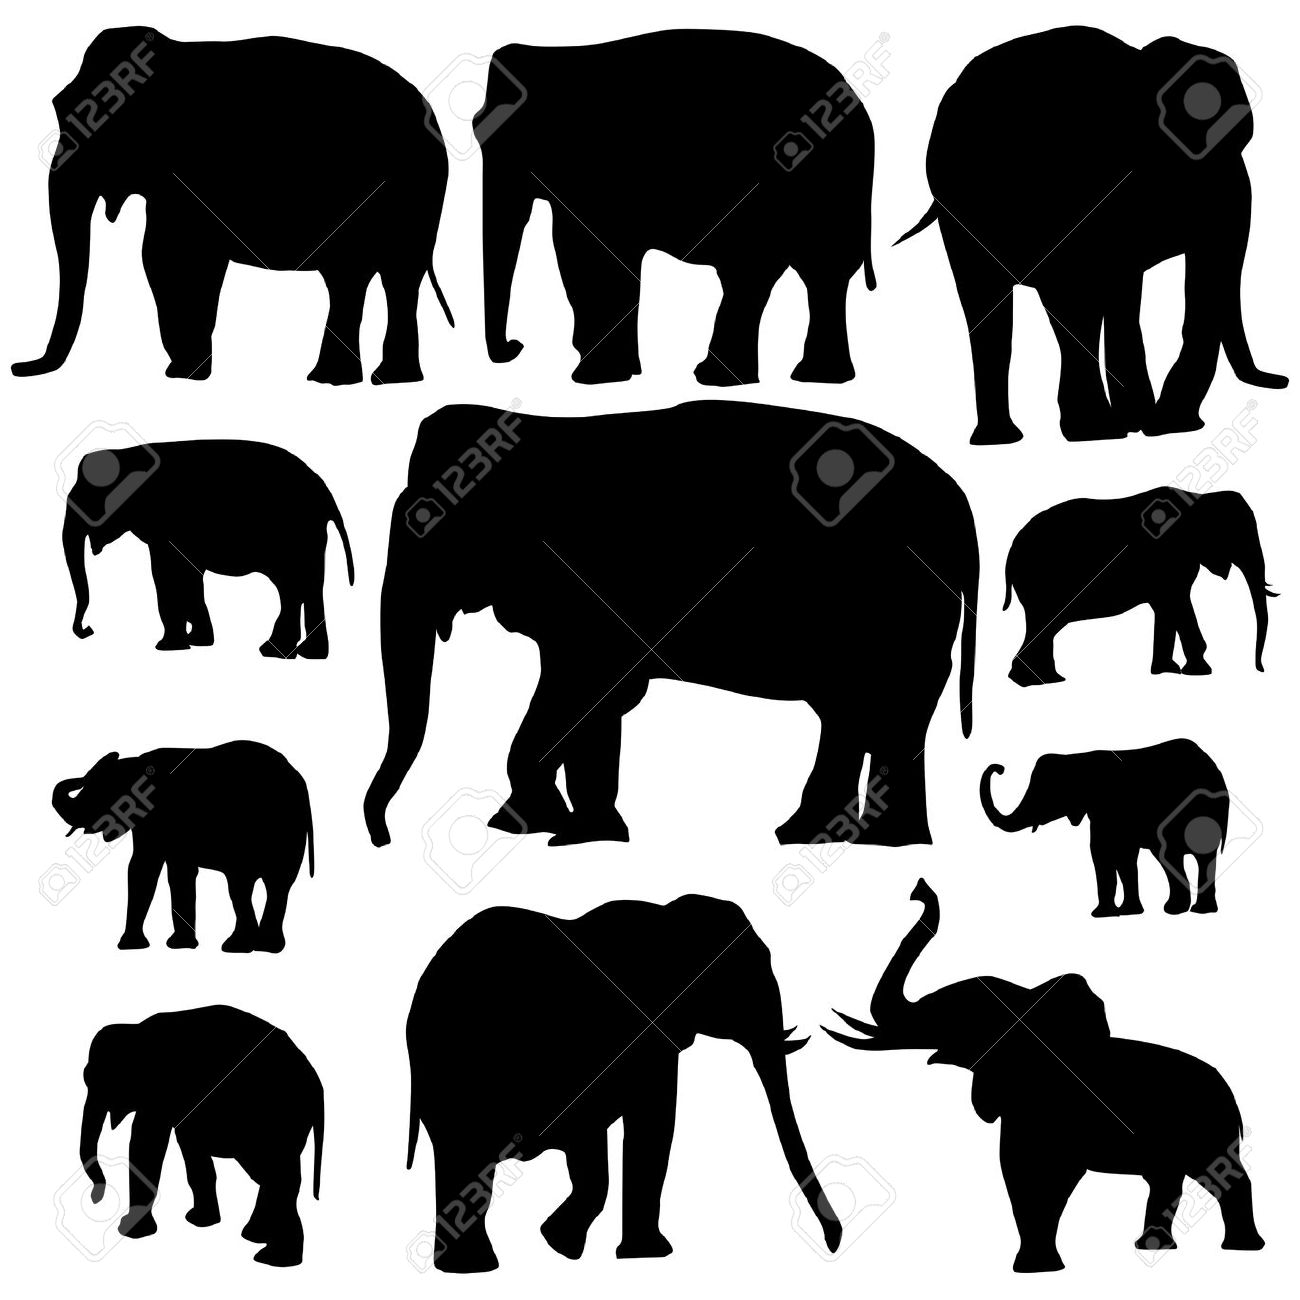 Asian Elephant clipart #11, Download drawings